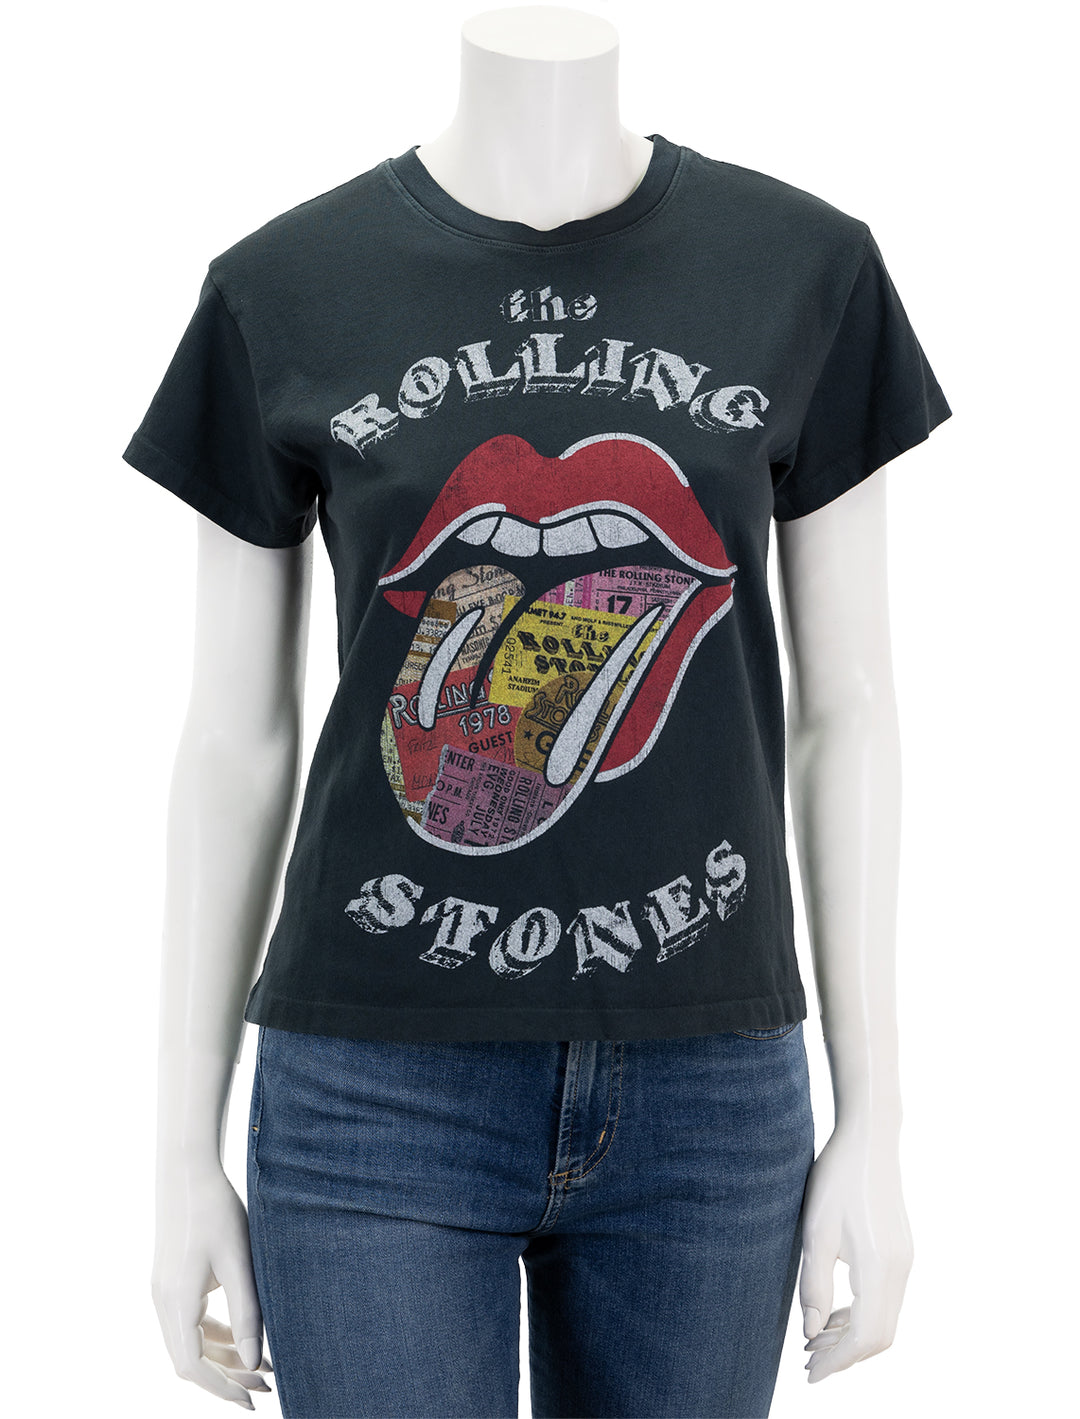 Front view of Daydreamer's rolling stones ticket fill tongue tour tee.